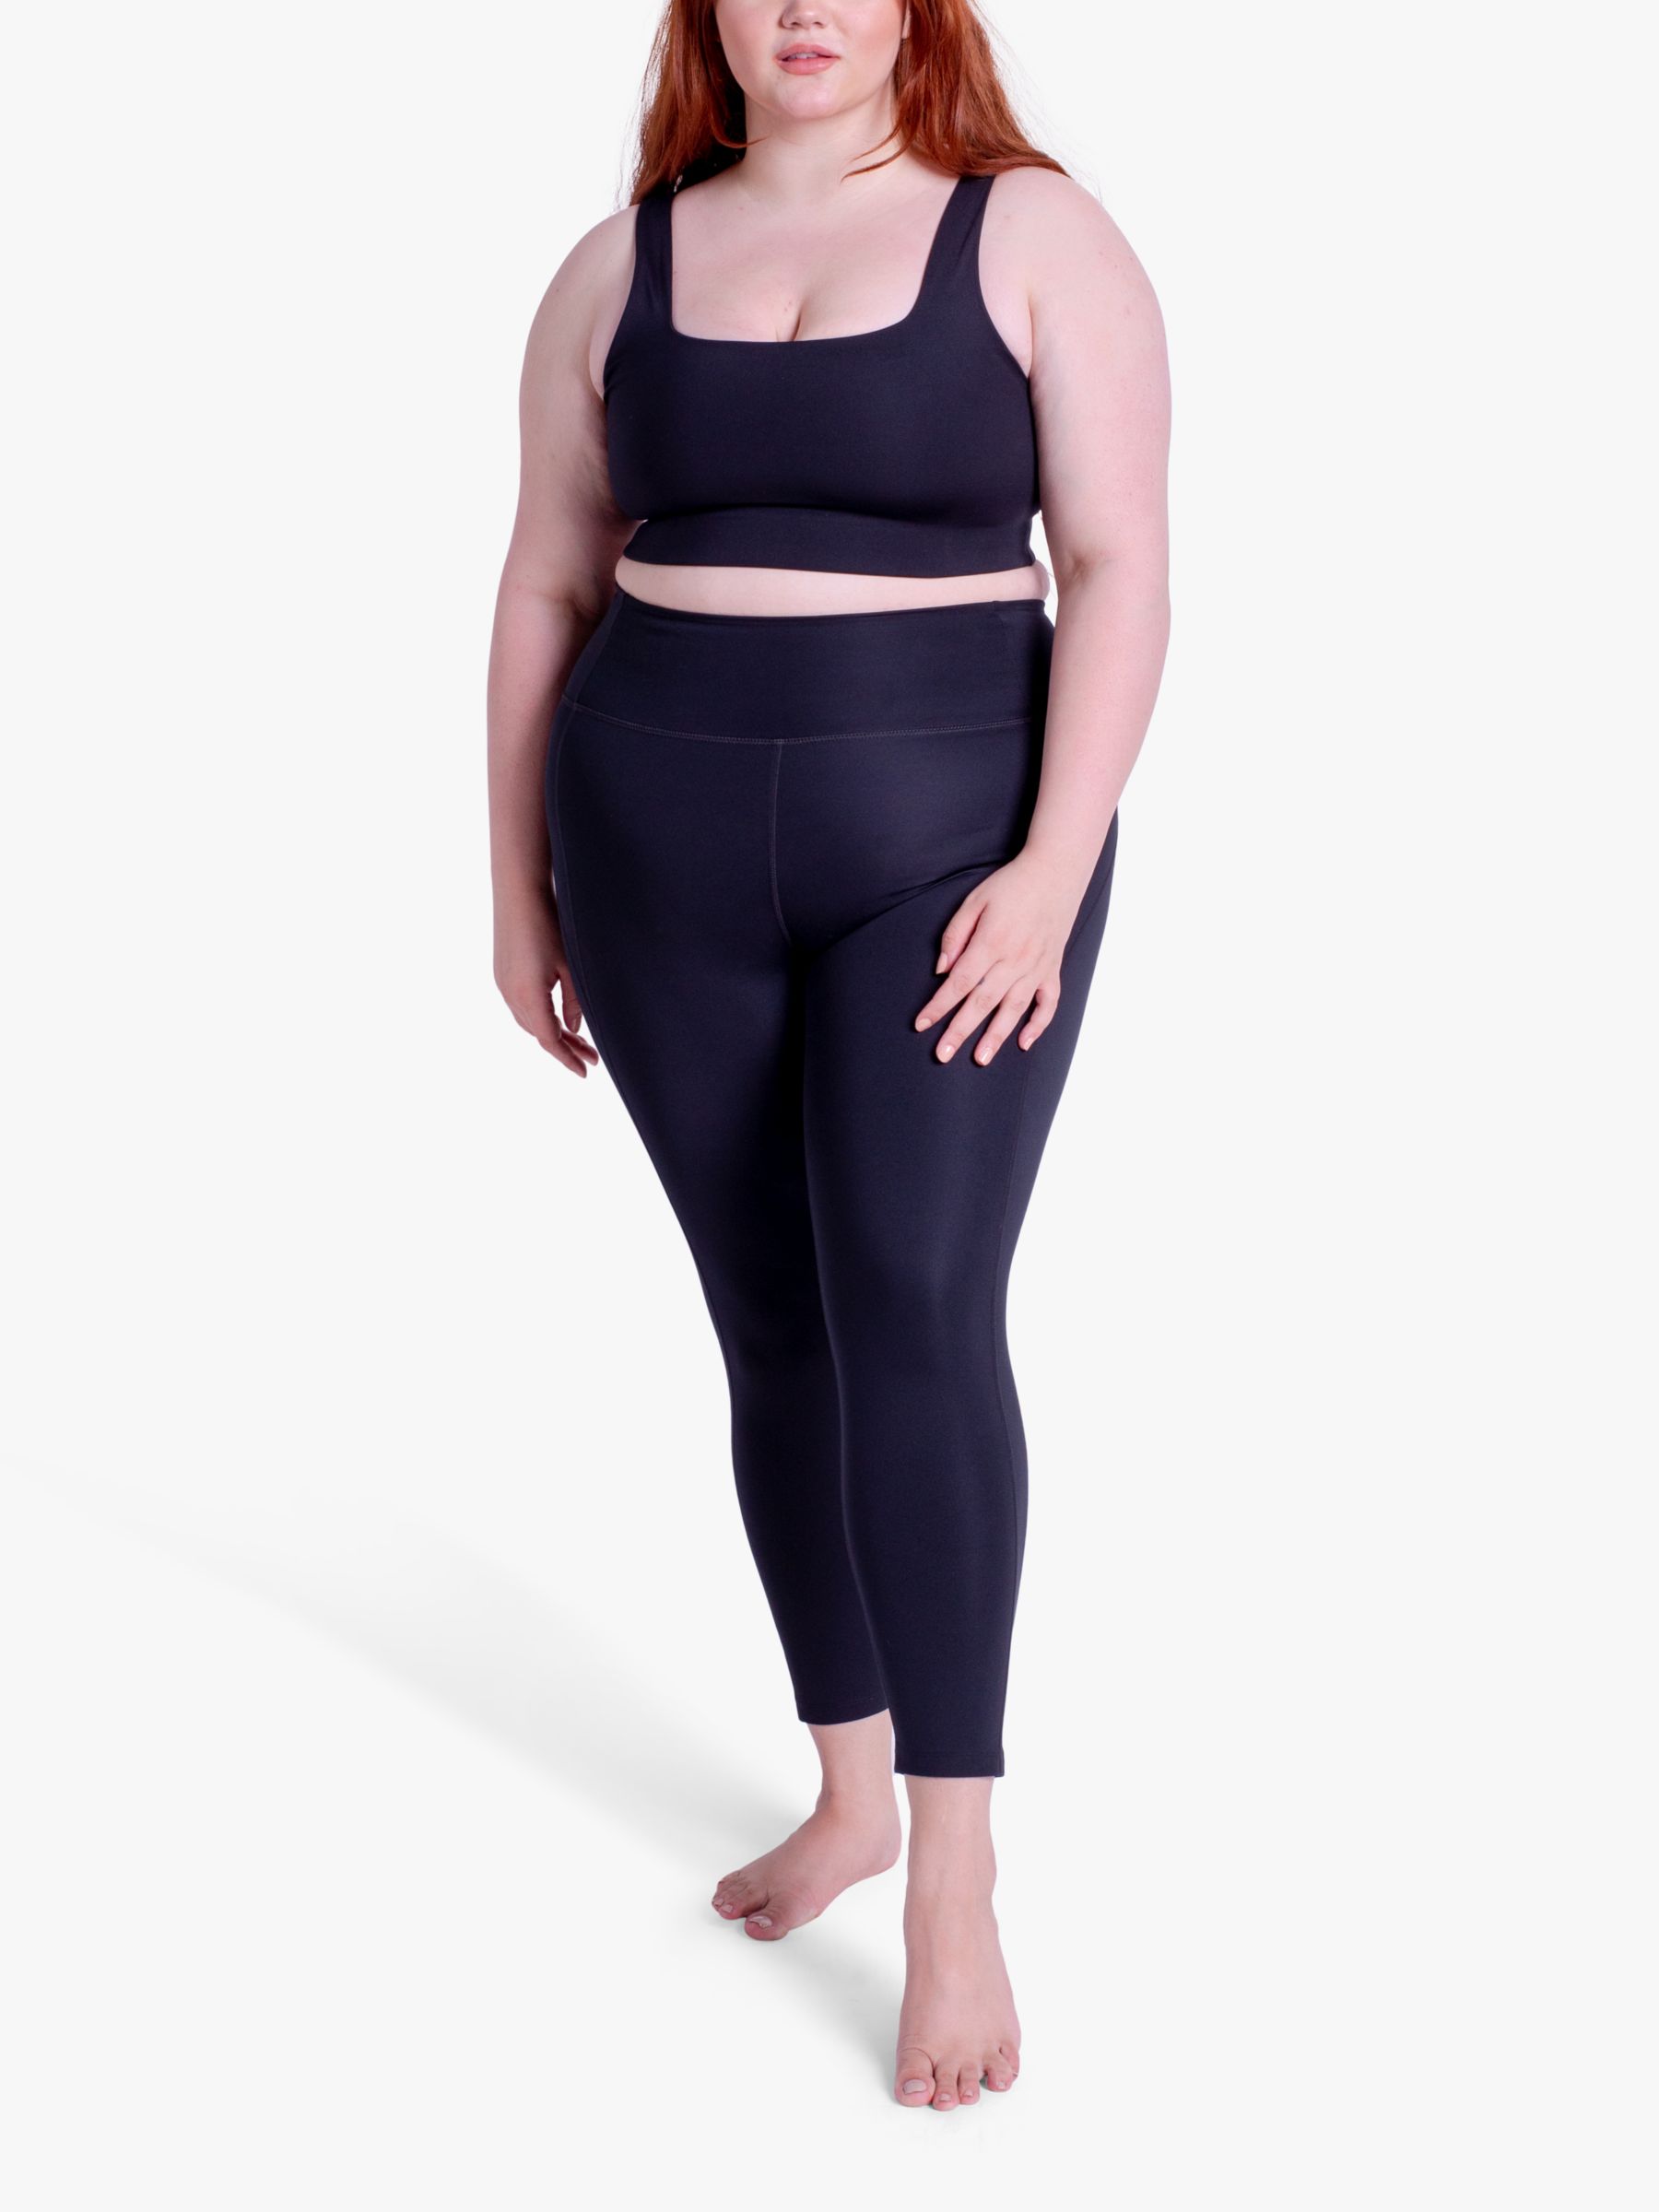 Girlfriend Collective Tommy Sports Bra, Black at John Lewis & Partners